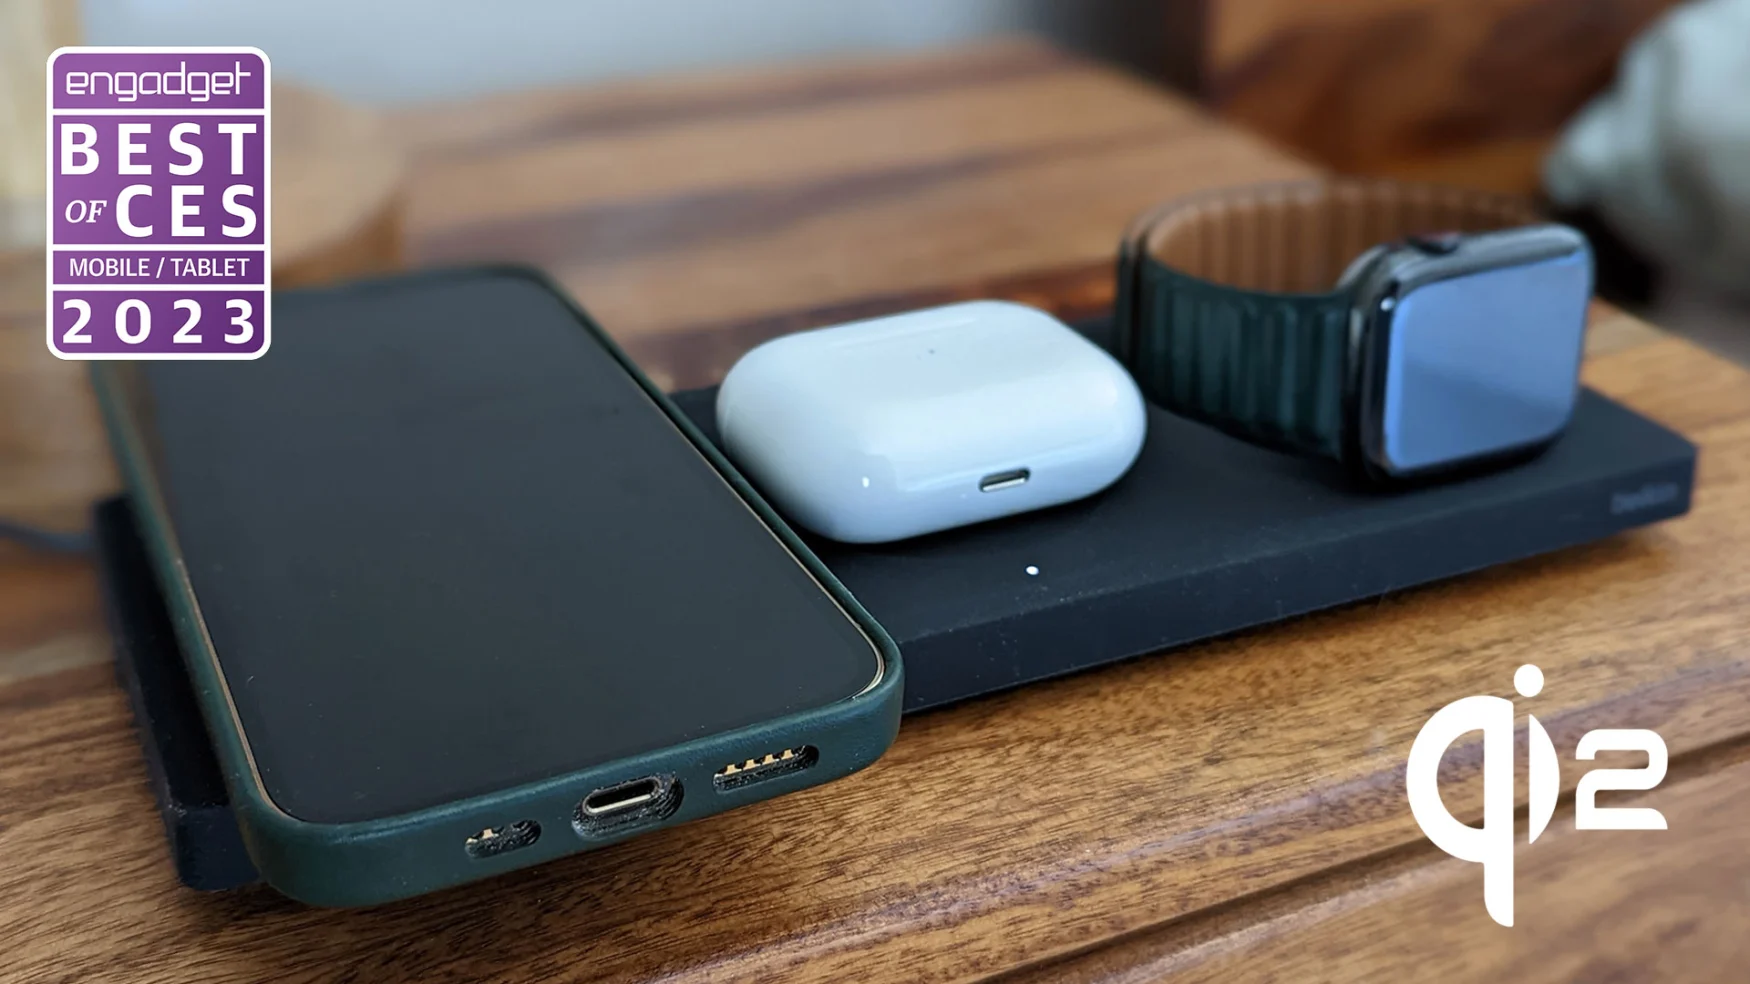 A Belkin wireless charger with a phone, AirPods case and Apple Watch charging on it sits on a wooden side table.